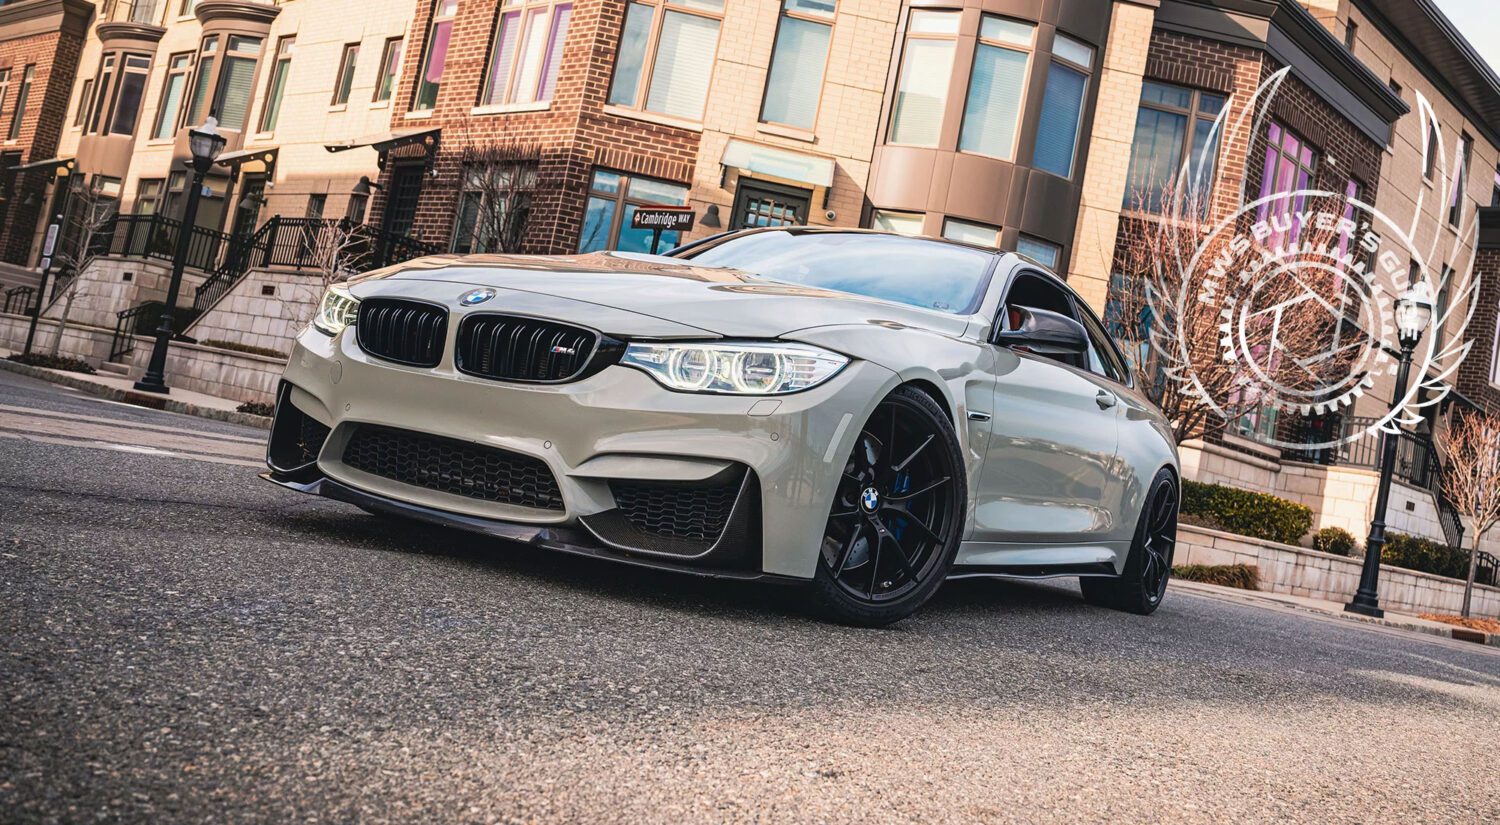 The BMW F82 M4 Buyer’s Guide